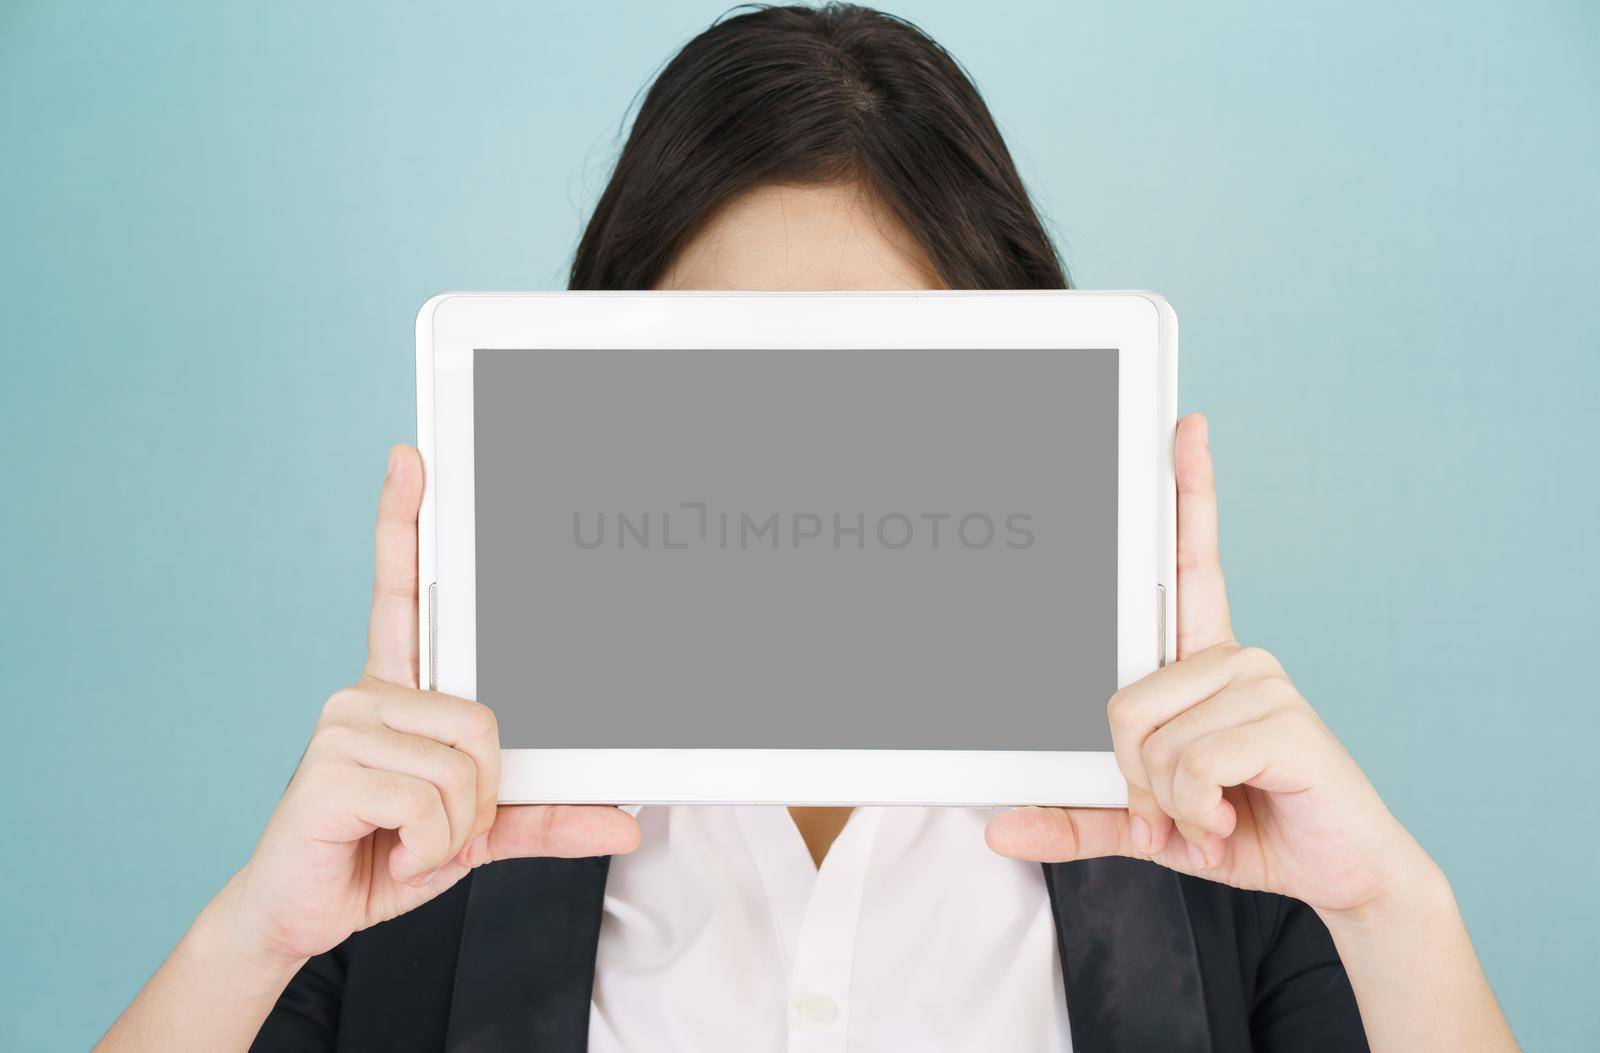 Young asian women in suit holding her digital tablet standing against green background